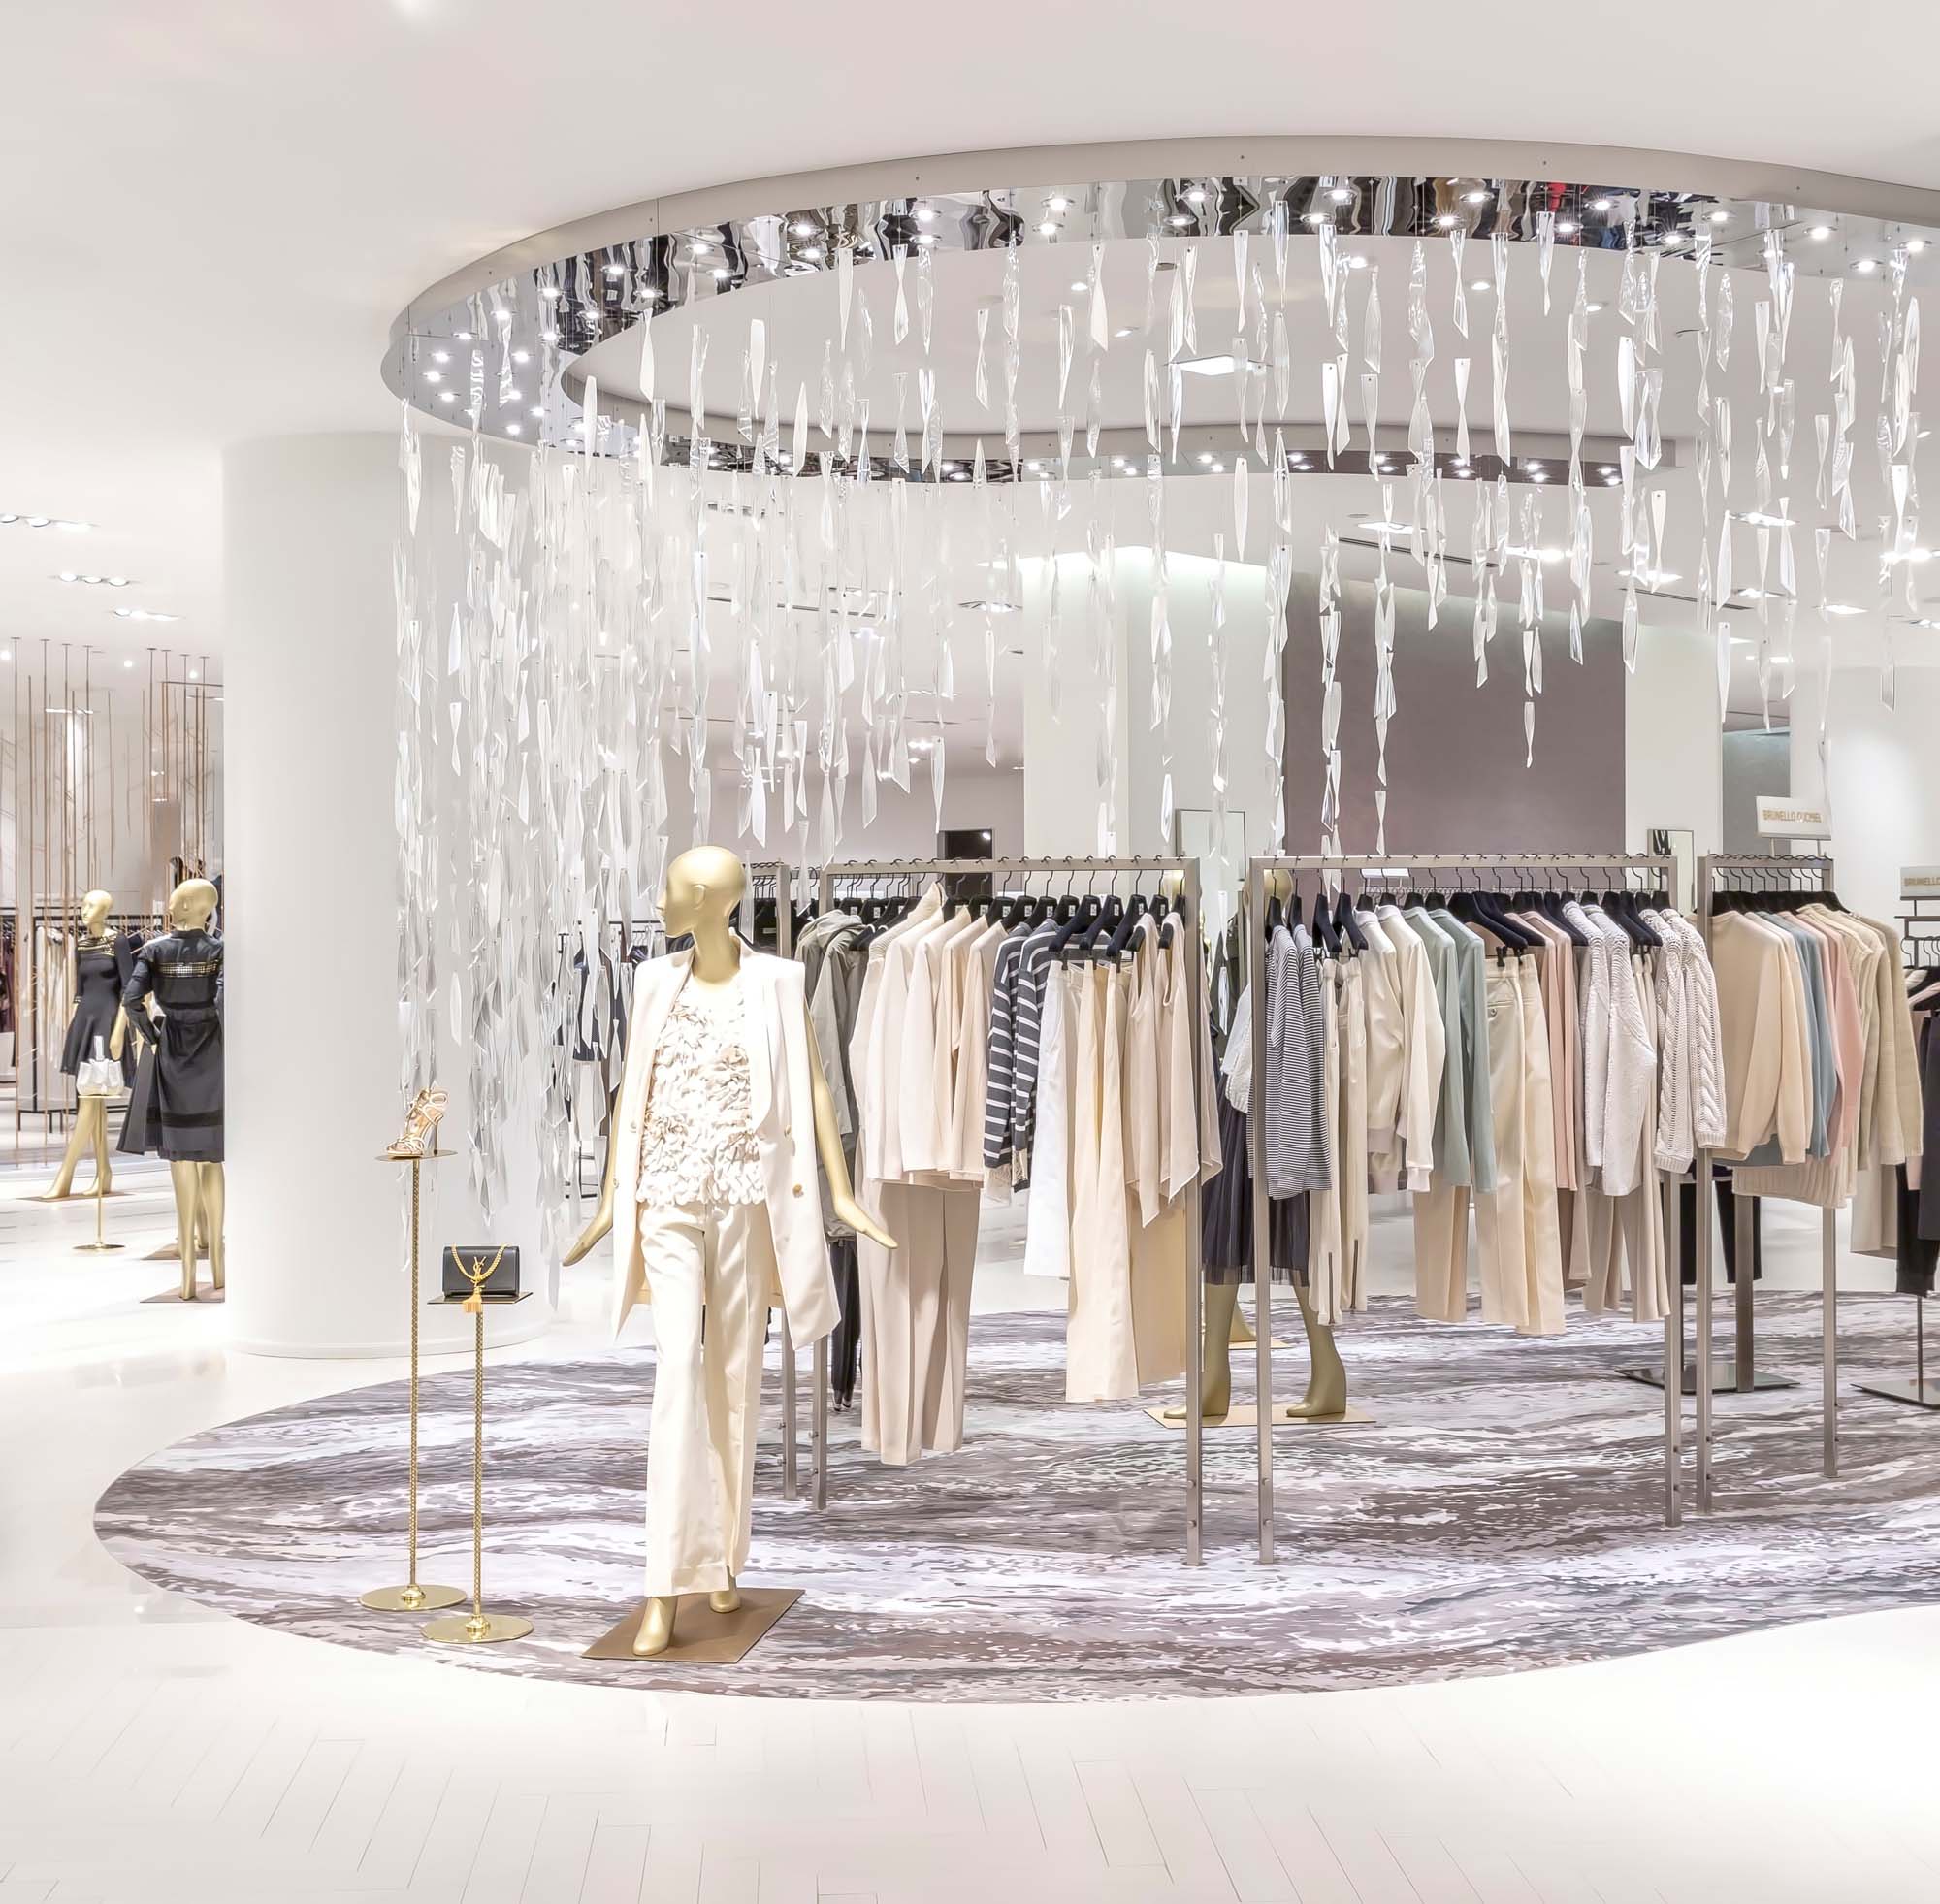 Saks Fifth Avenue outlet store is now open in Toronto